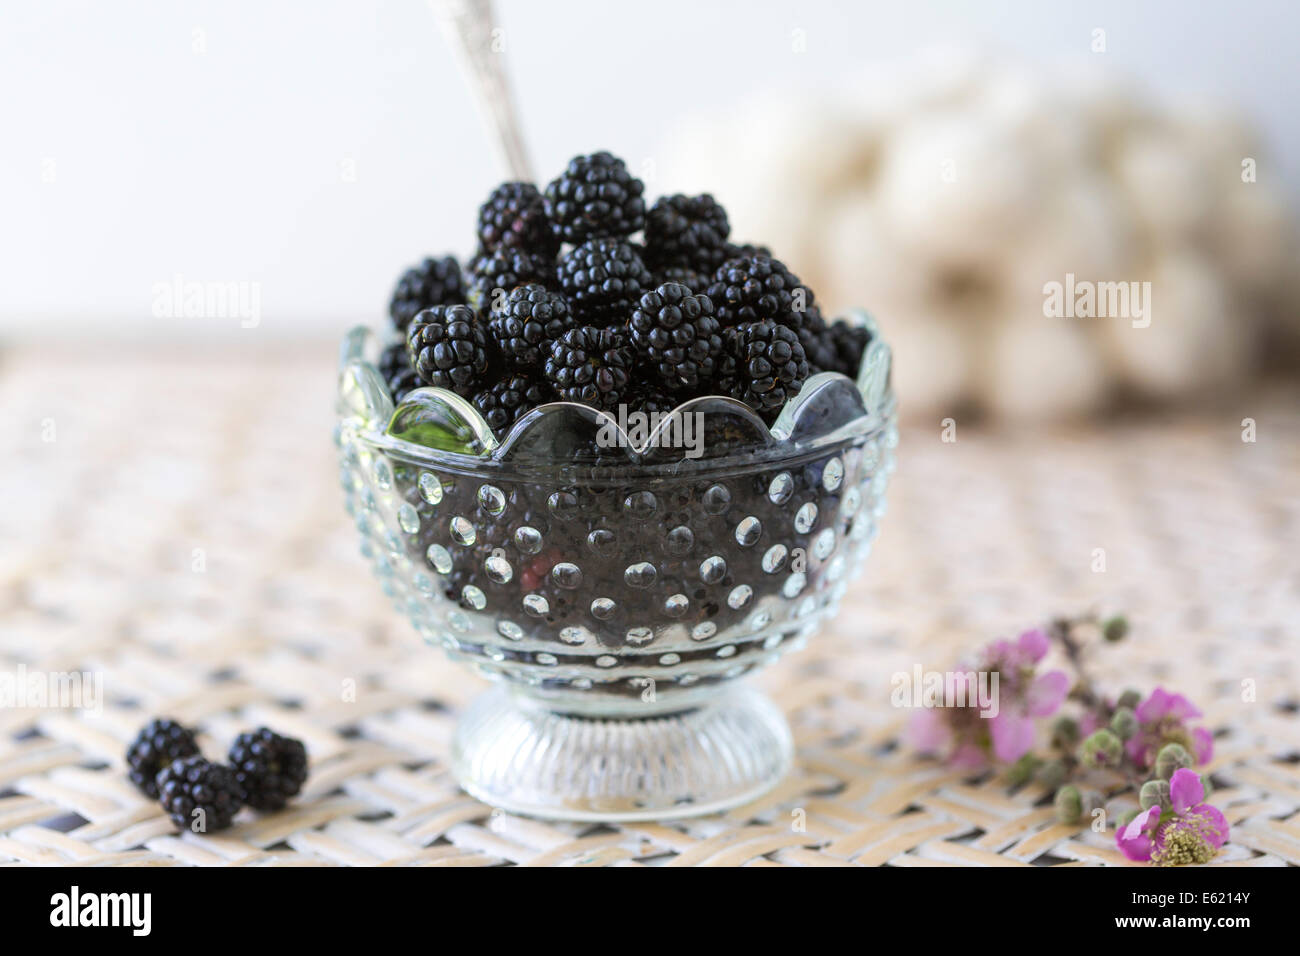 blackberries in glass dish on woven tray with vintage spoon Stock Photo